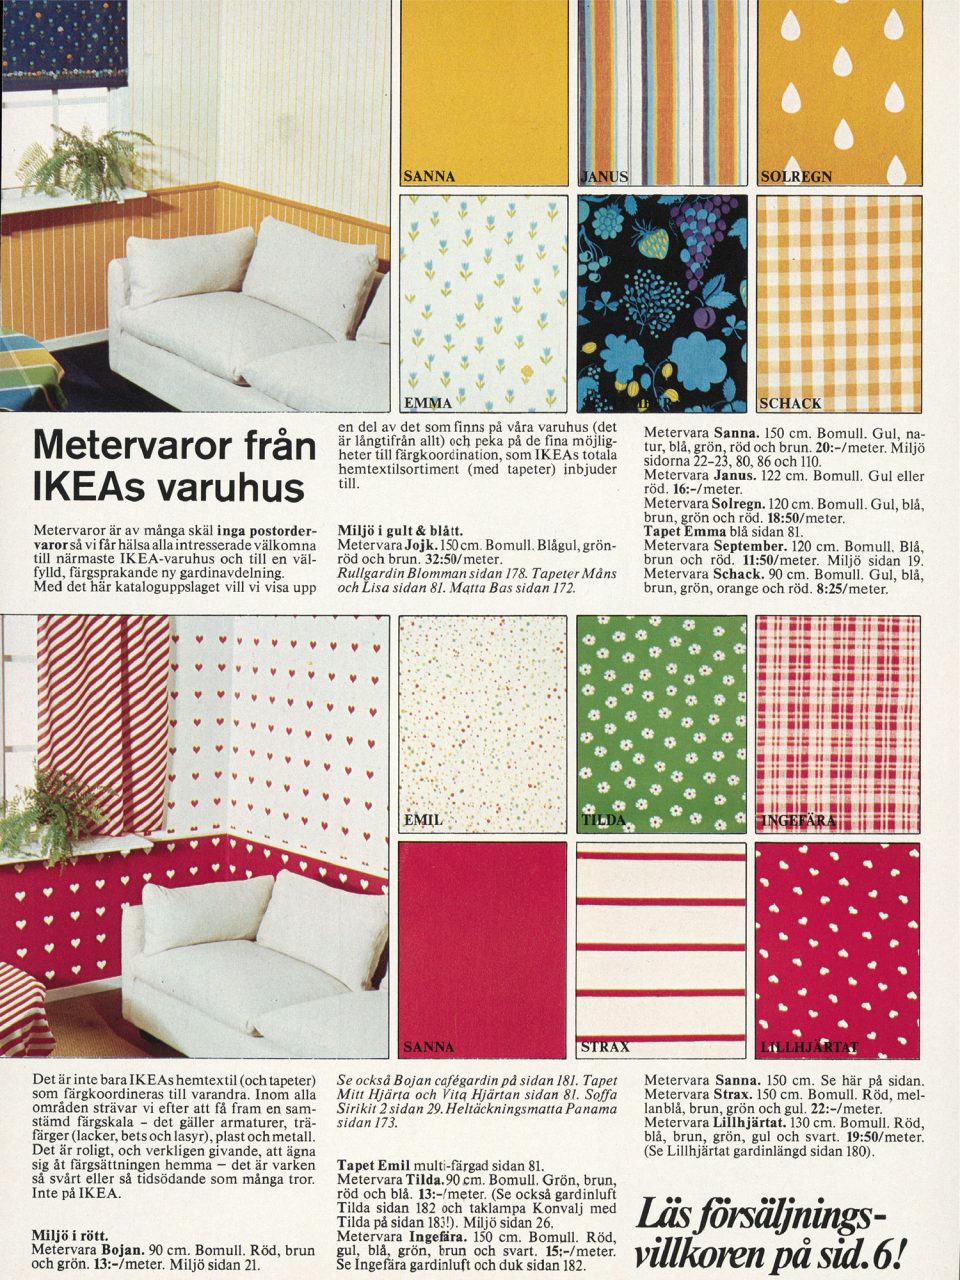 IKEA catalogue 1976 page featuring many different patterned and coloured fabrics.